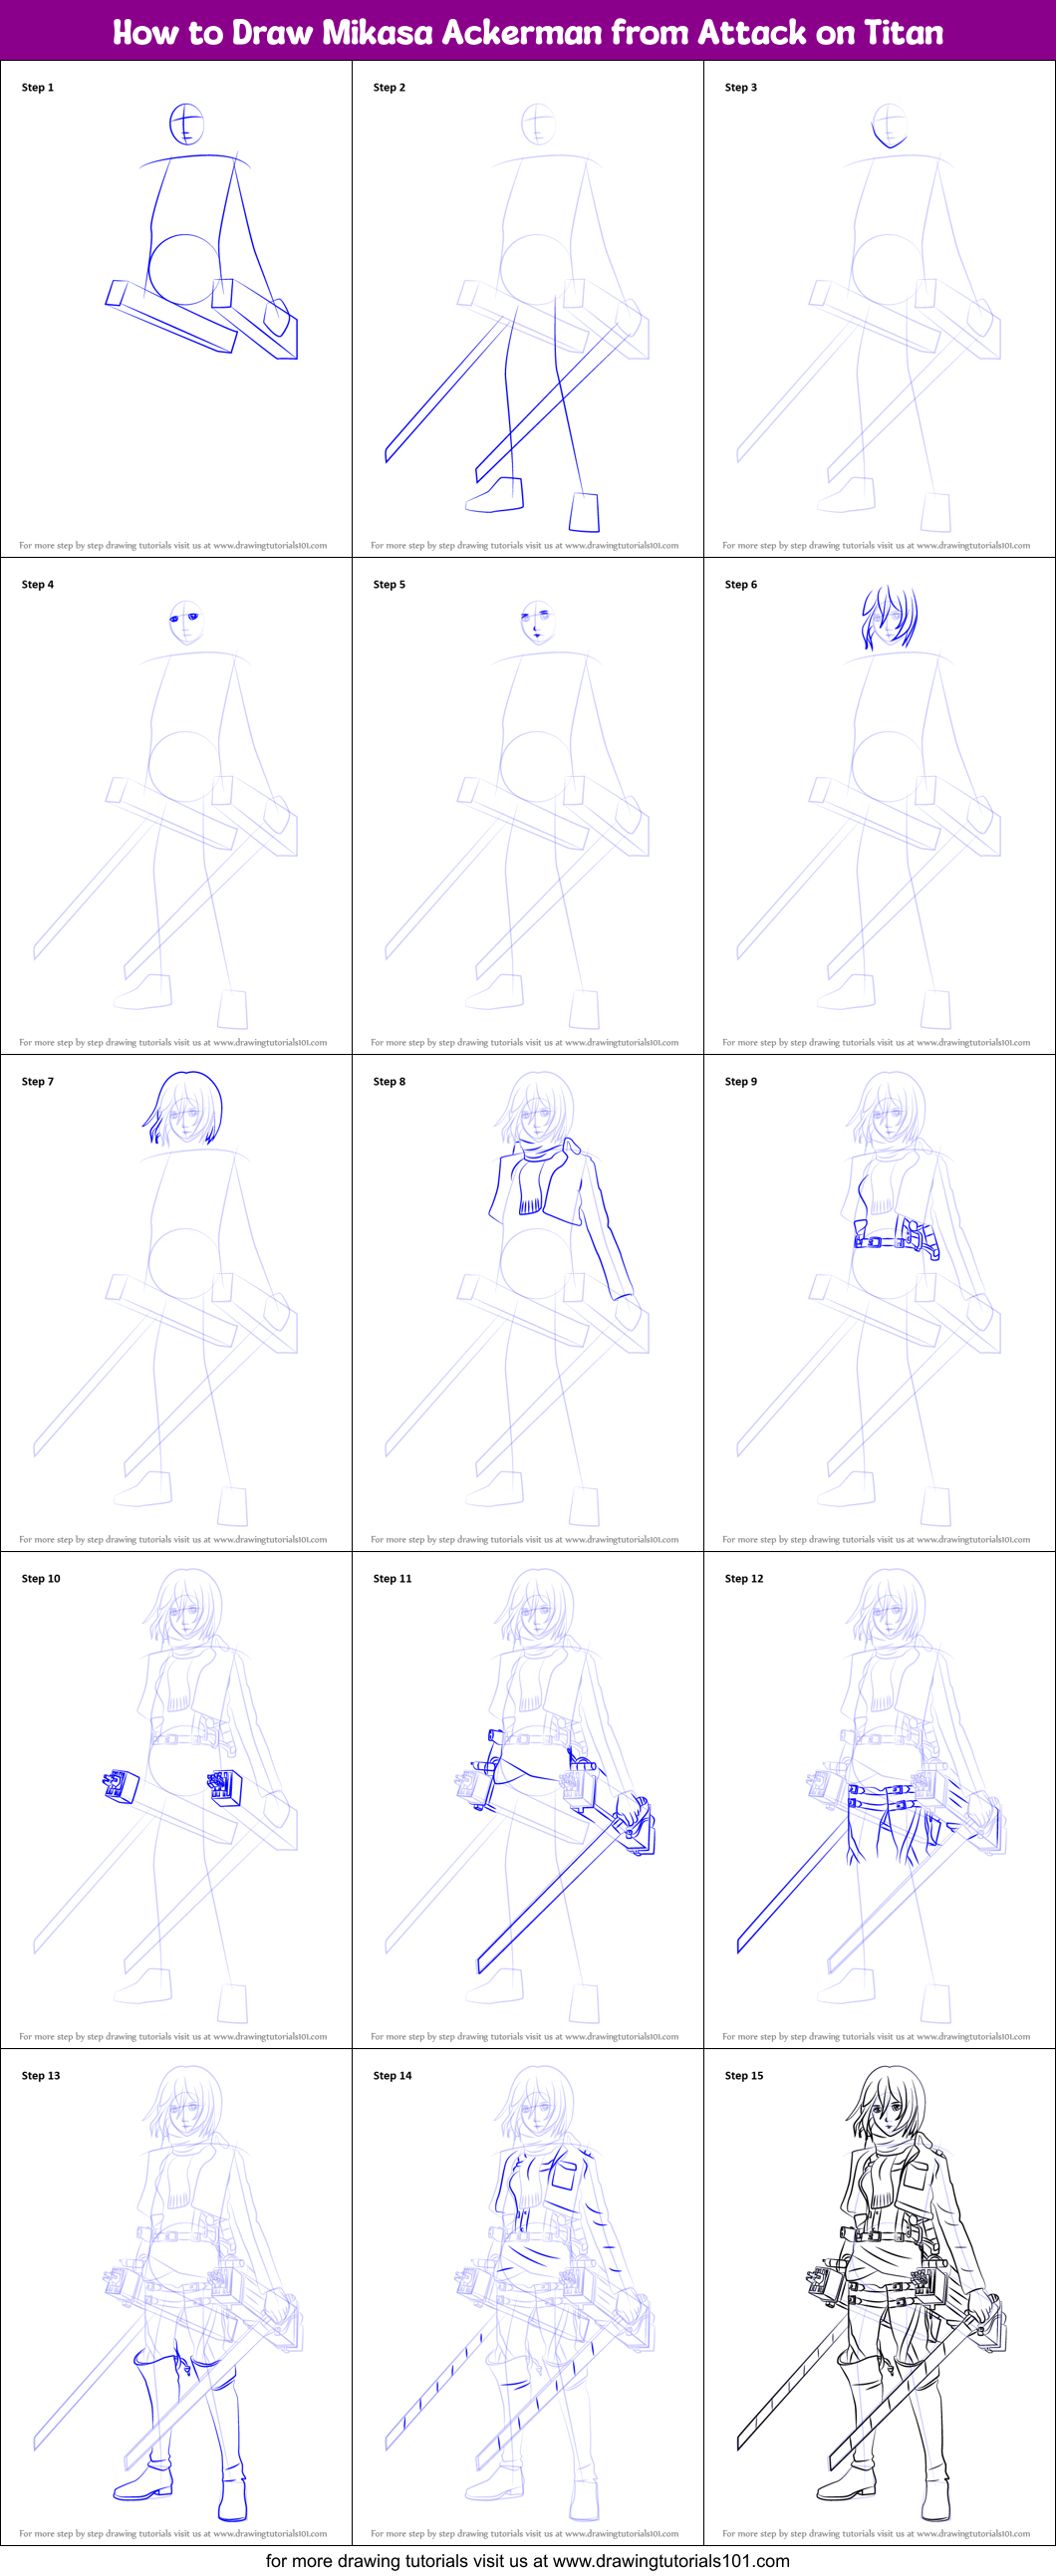 How to Draw Mikasa Ackerman from Attack on Titan printable step by step